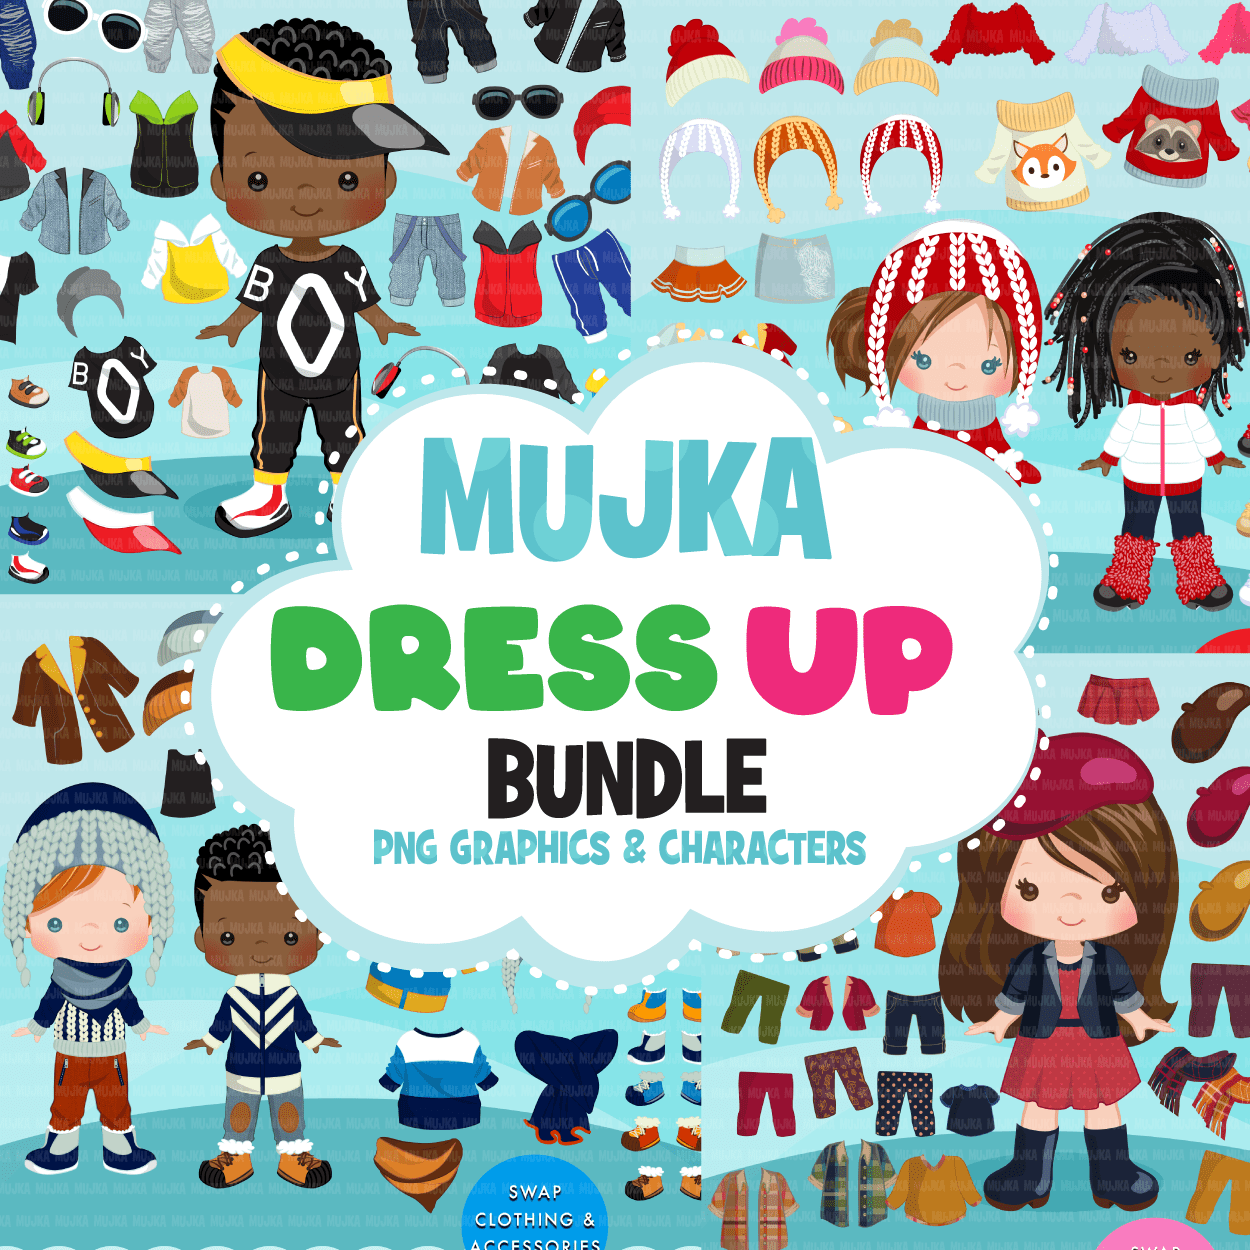 Paper Doll clipart Bundle, Dress up graphics, fashion outfits for